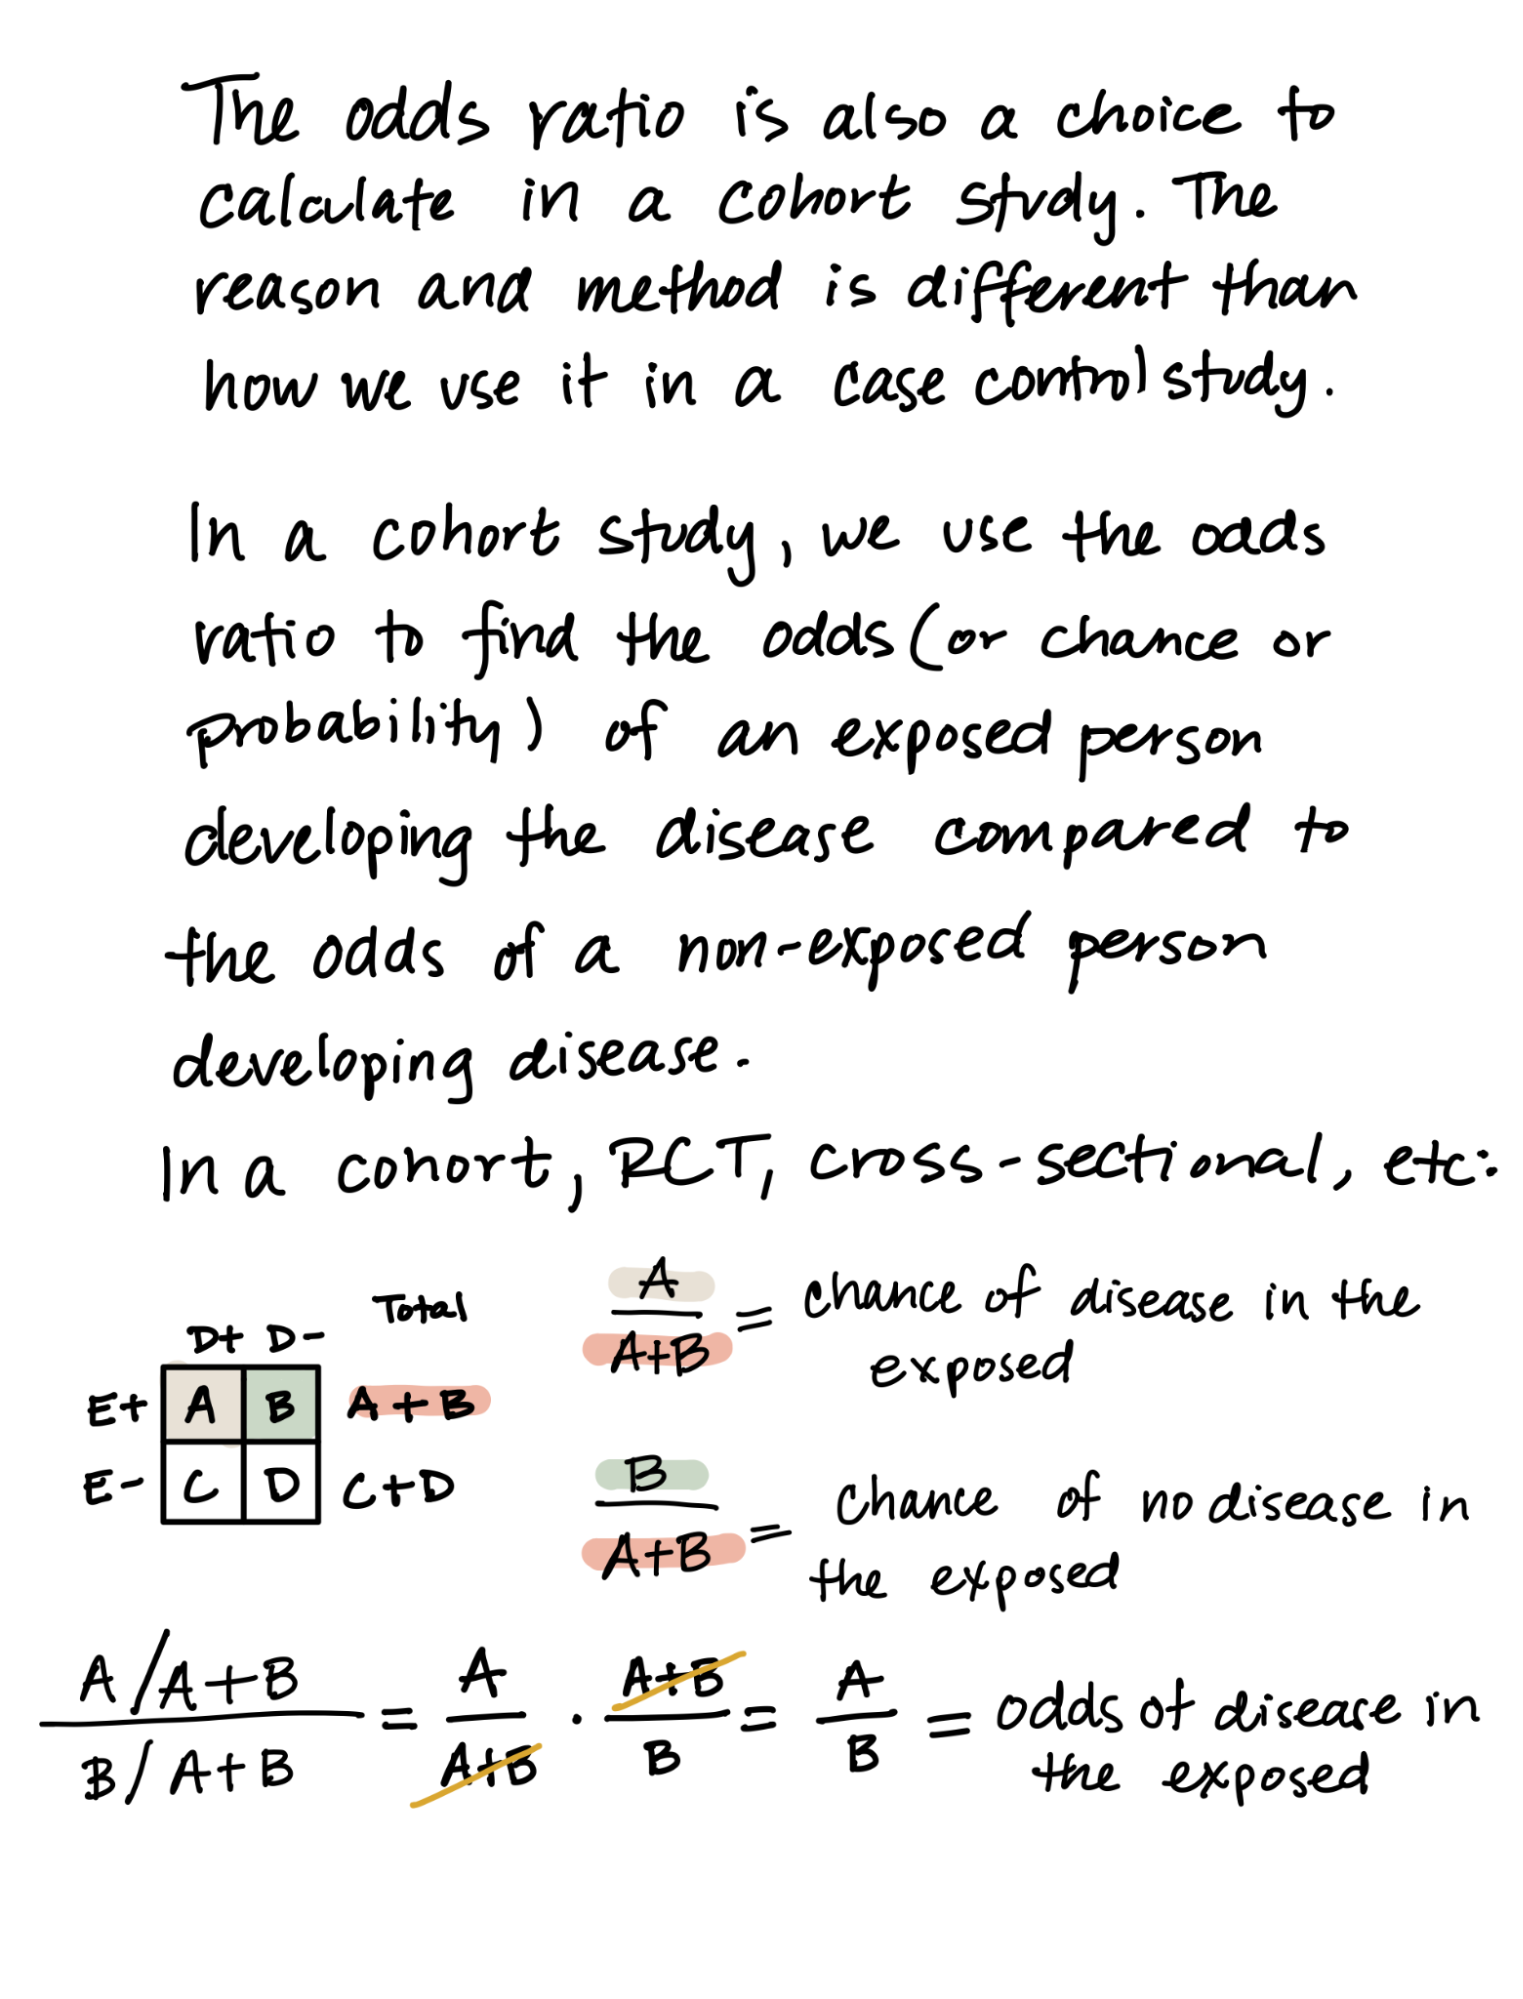 The odds ratio is also a choice to calculate in a cohort study. The reason and method is different than how we use it in a case control study. In a cohort study, we use the odds ratio to find the odds (or chance or probability) of an exposed person developing the disease compared to the odds of a non-exposed person developing disease. In a cohort, randomized control trial (RCT), cross sectional, etc: Two-by-two table as found in Chapter 2 Part 1 Summary. A/(A+B) equals chance of disease in the exposed. B/(A+B) equals chance of no disease in the exposed. The ratio of the chance of disease in the exposed to the chance of no disease in the exposed causes (A+B) to cancel out, leaving A/B, which equals the odds of disease in the exposed.